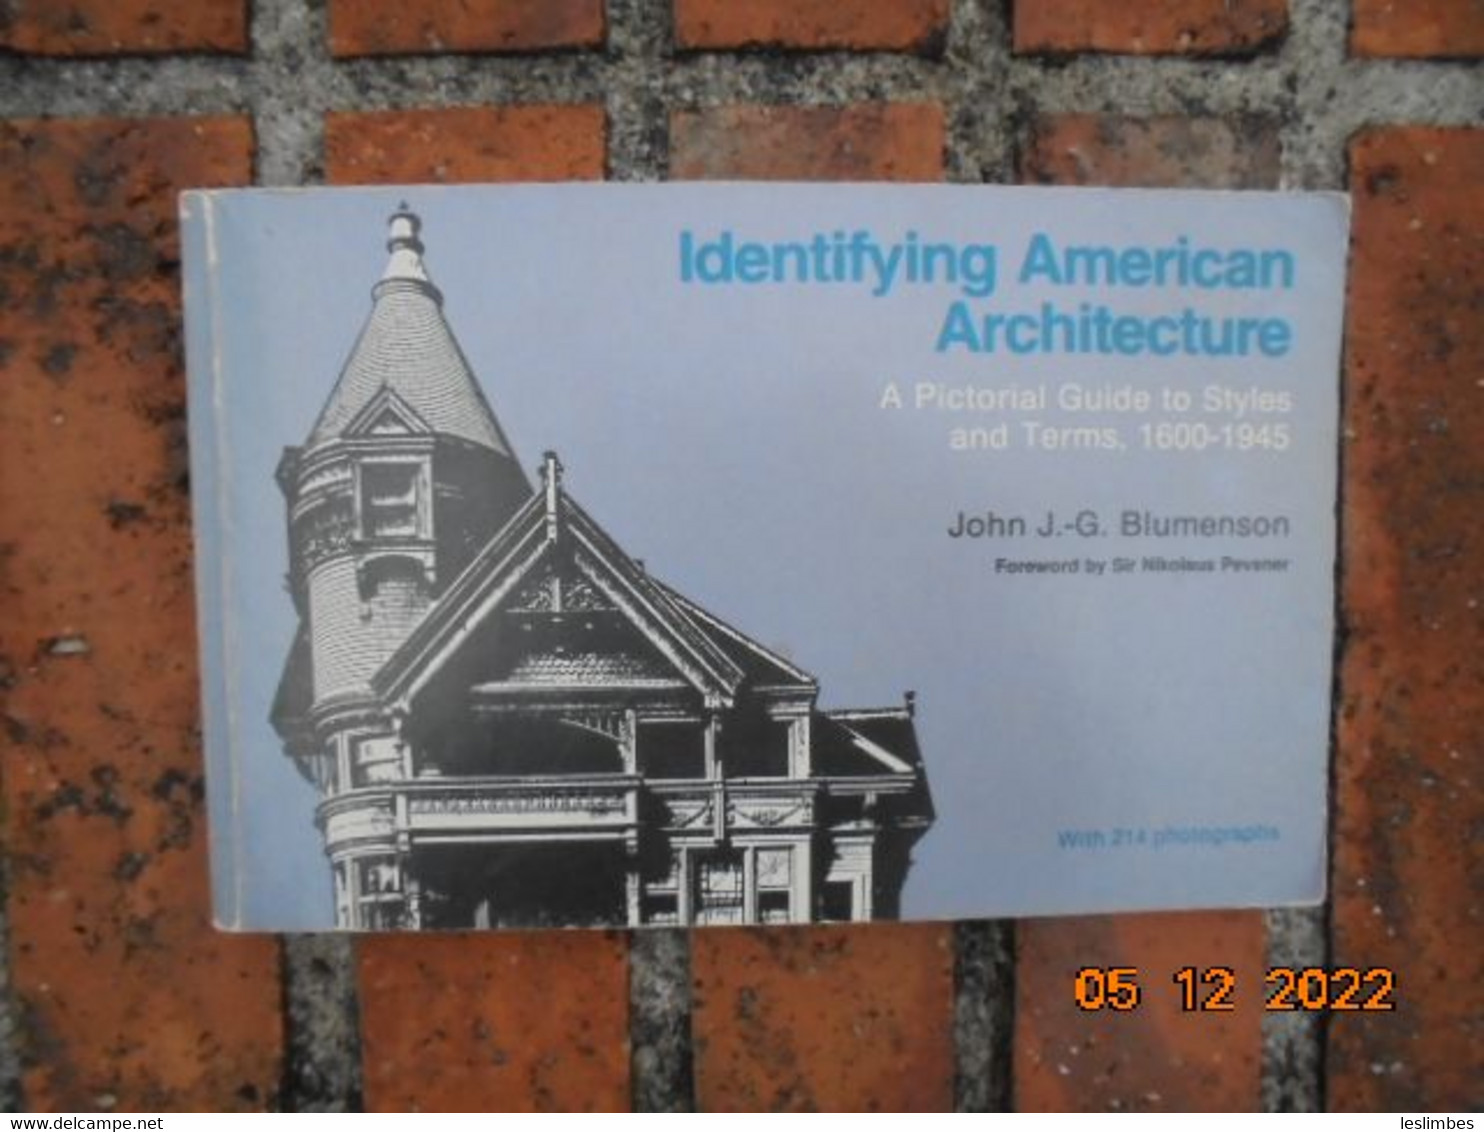 Identifying American Architecture: A Pictorial Guide To Styles And Terms 1600-1945 By John J. G. Blumenson - Architektur